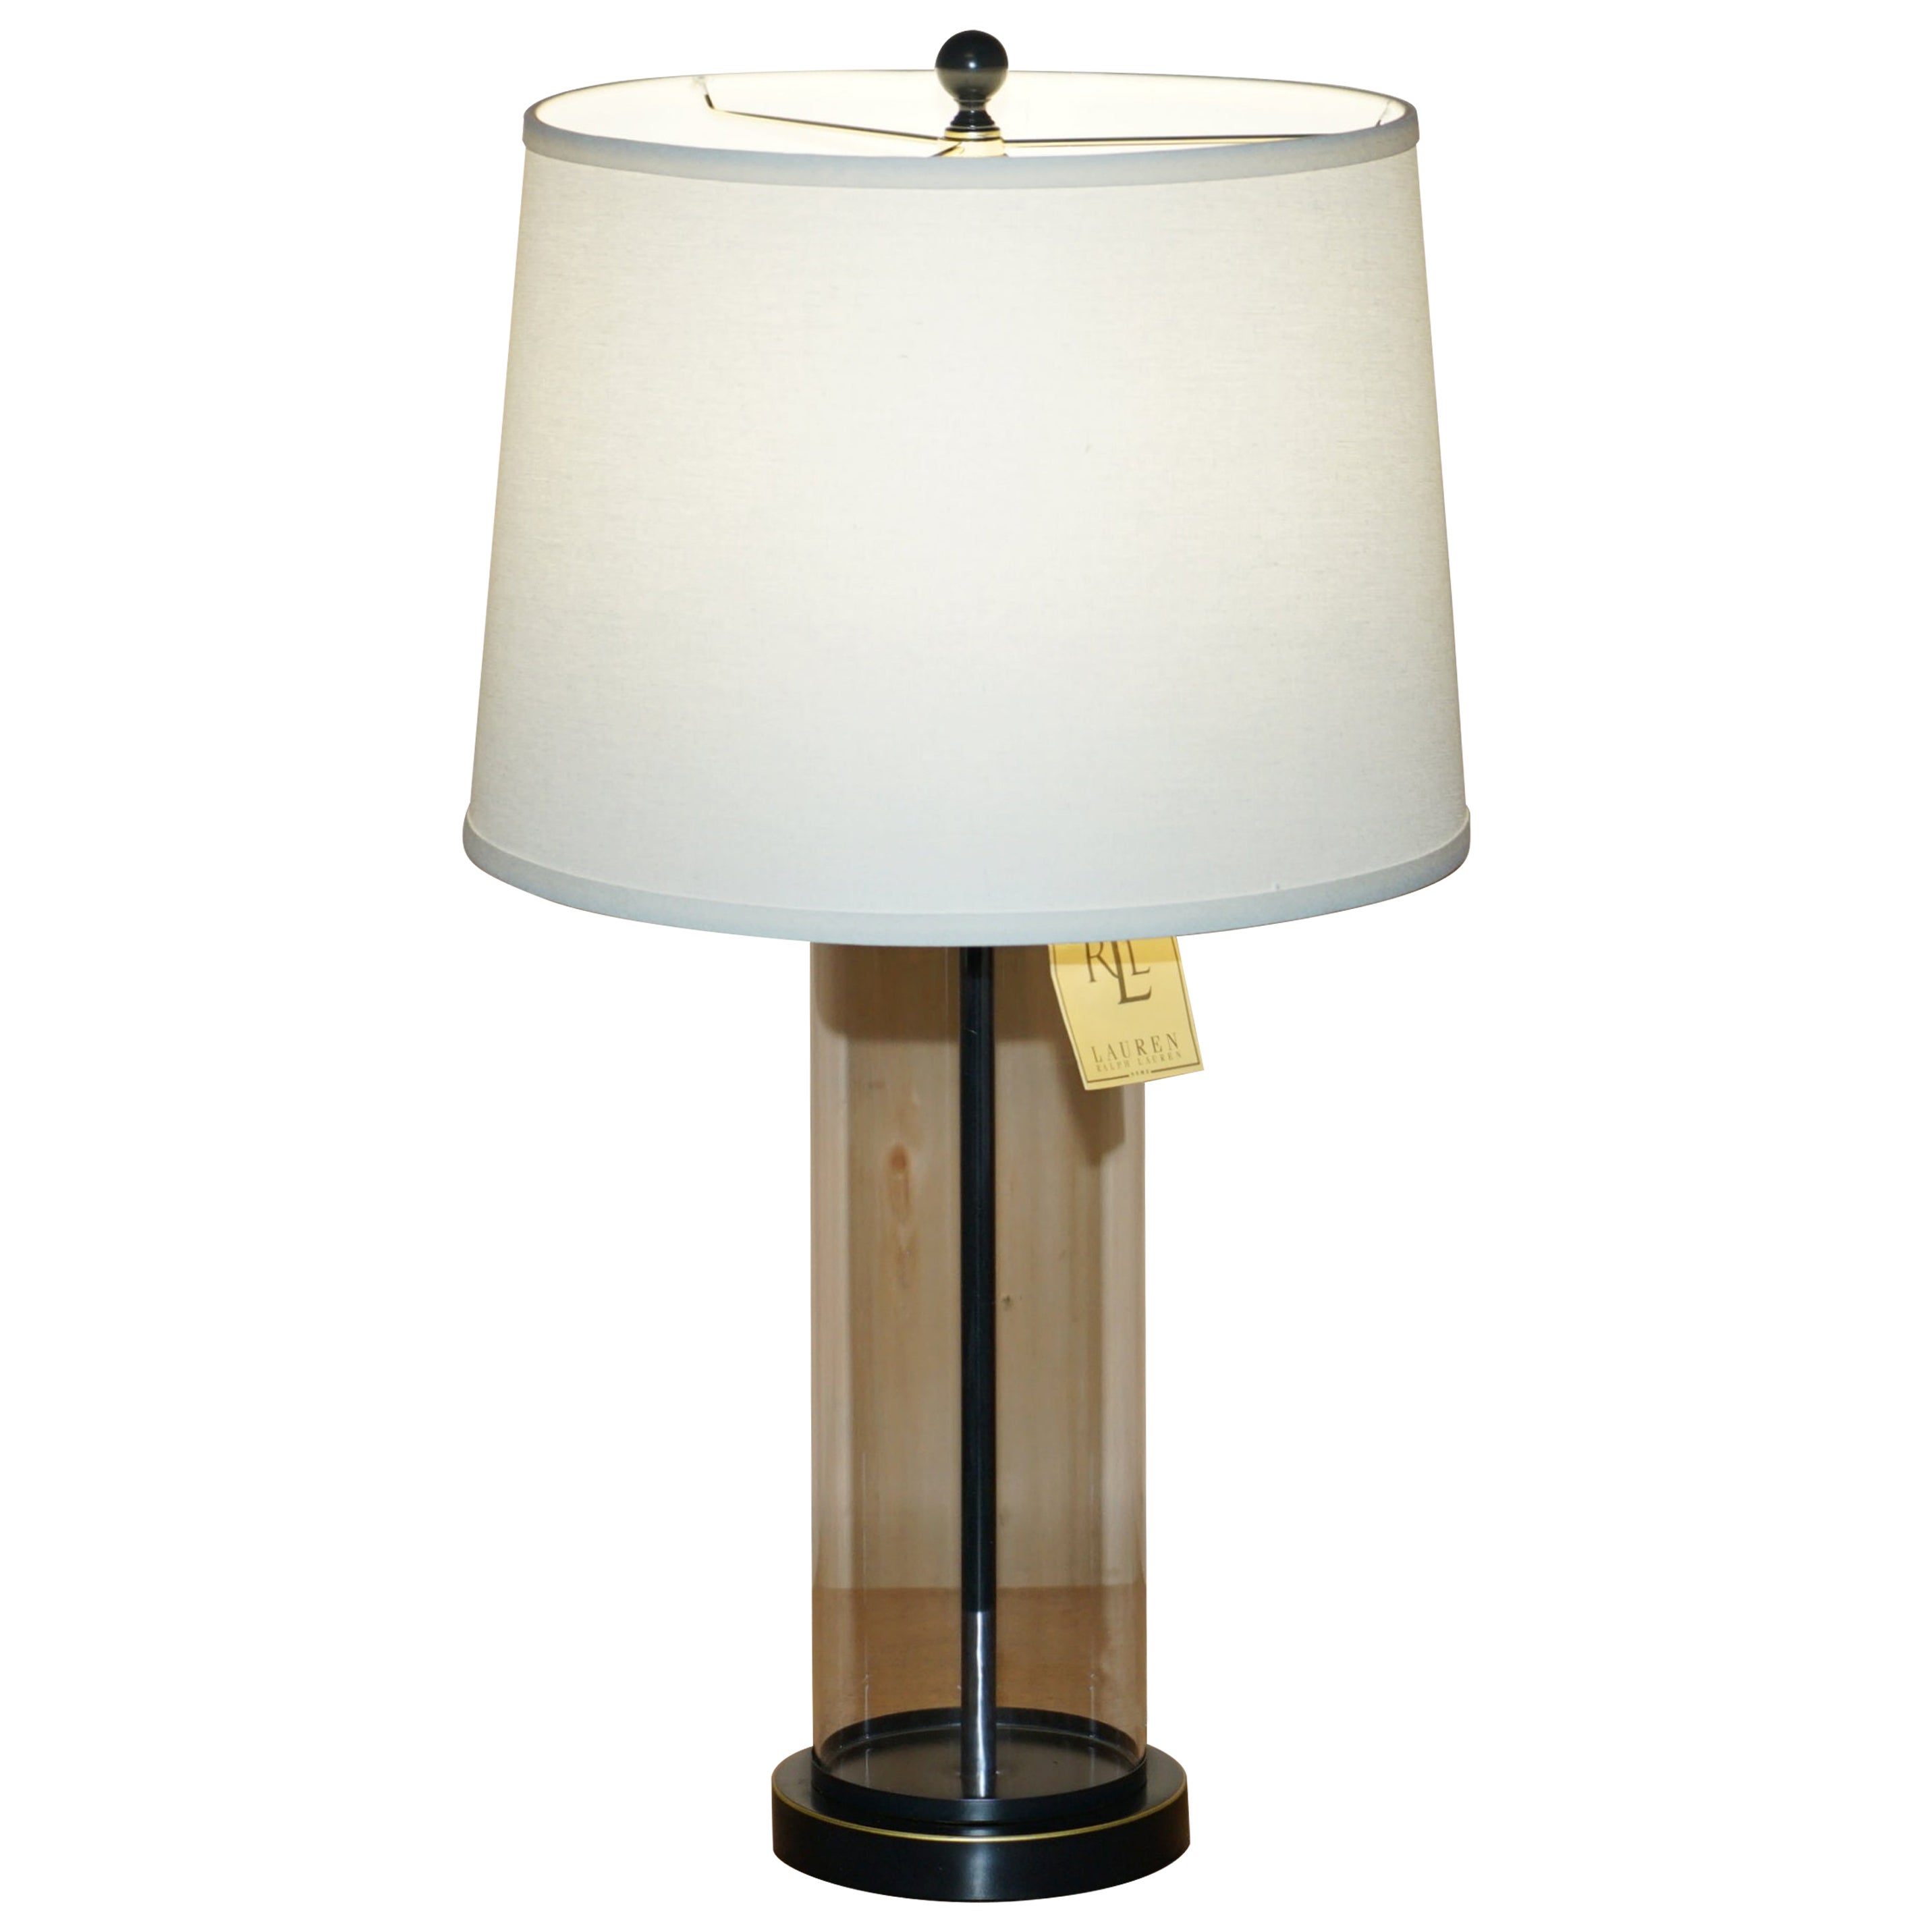 1 OF 2 BRAND NEW IN THE BOX RALPH LAUREN NAVY STORM LANTERN GLASS TABLE LAMPs For Sale